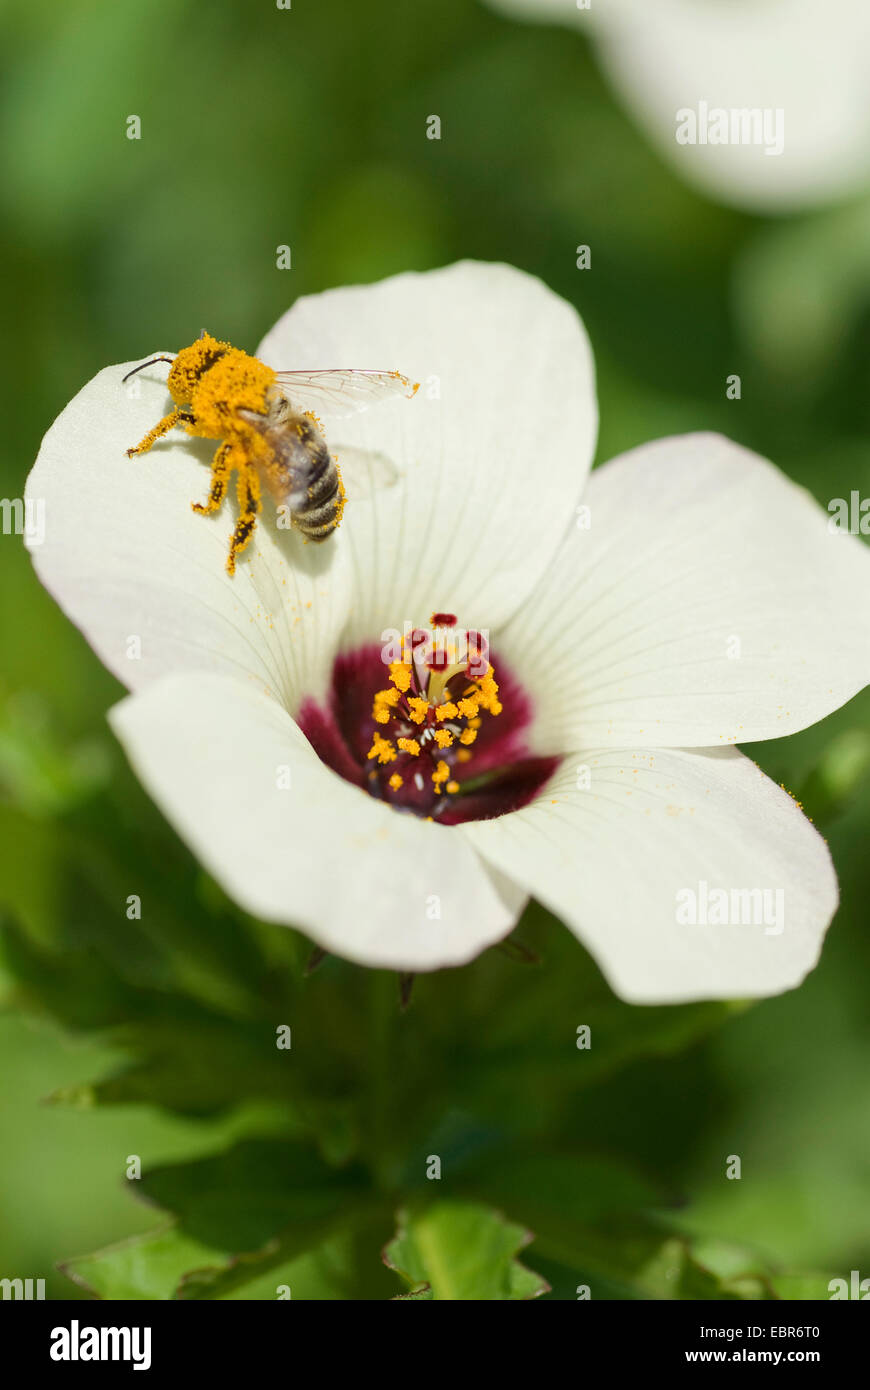 bladder ketmia, flower-of-an-hour, venice mallow (Hibiscus trionum), flower with bee, Germany Stock Photo